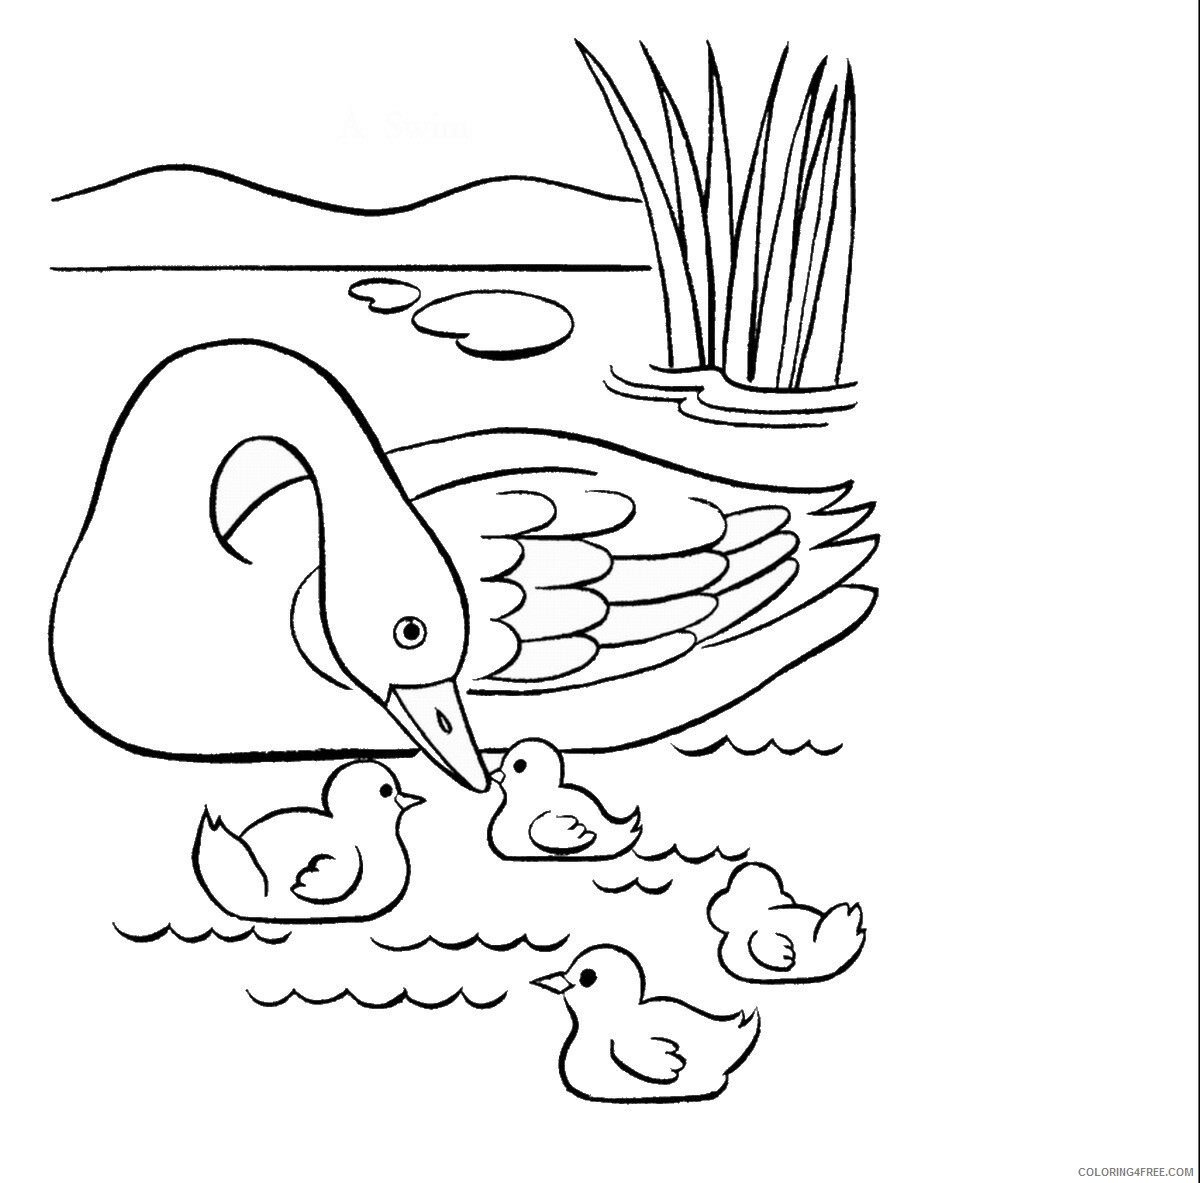 Duck Coloring Pages Animal Printable Sheets duck_cl_08 2021 1803 Coloring4free